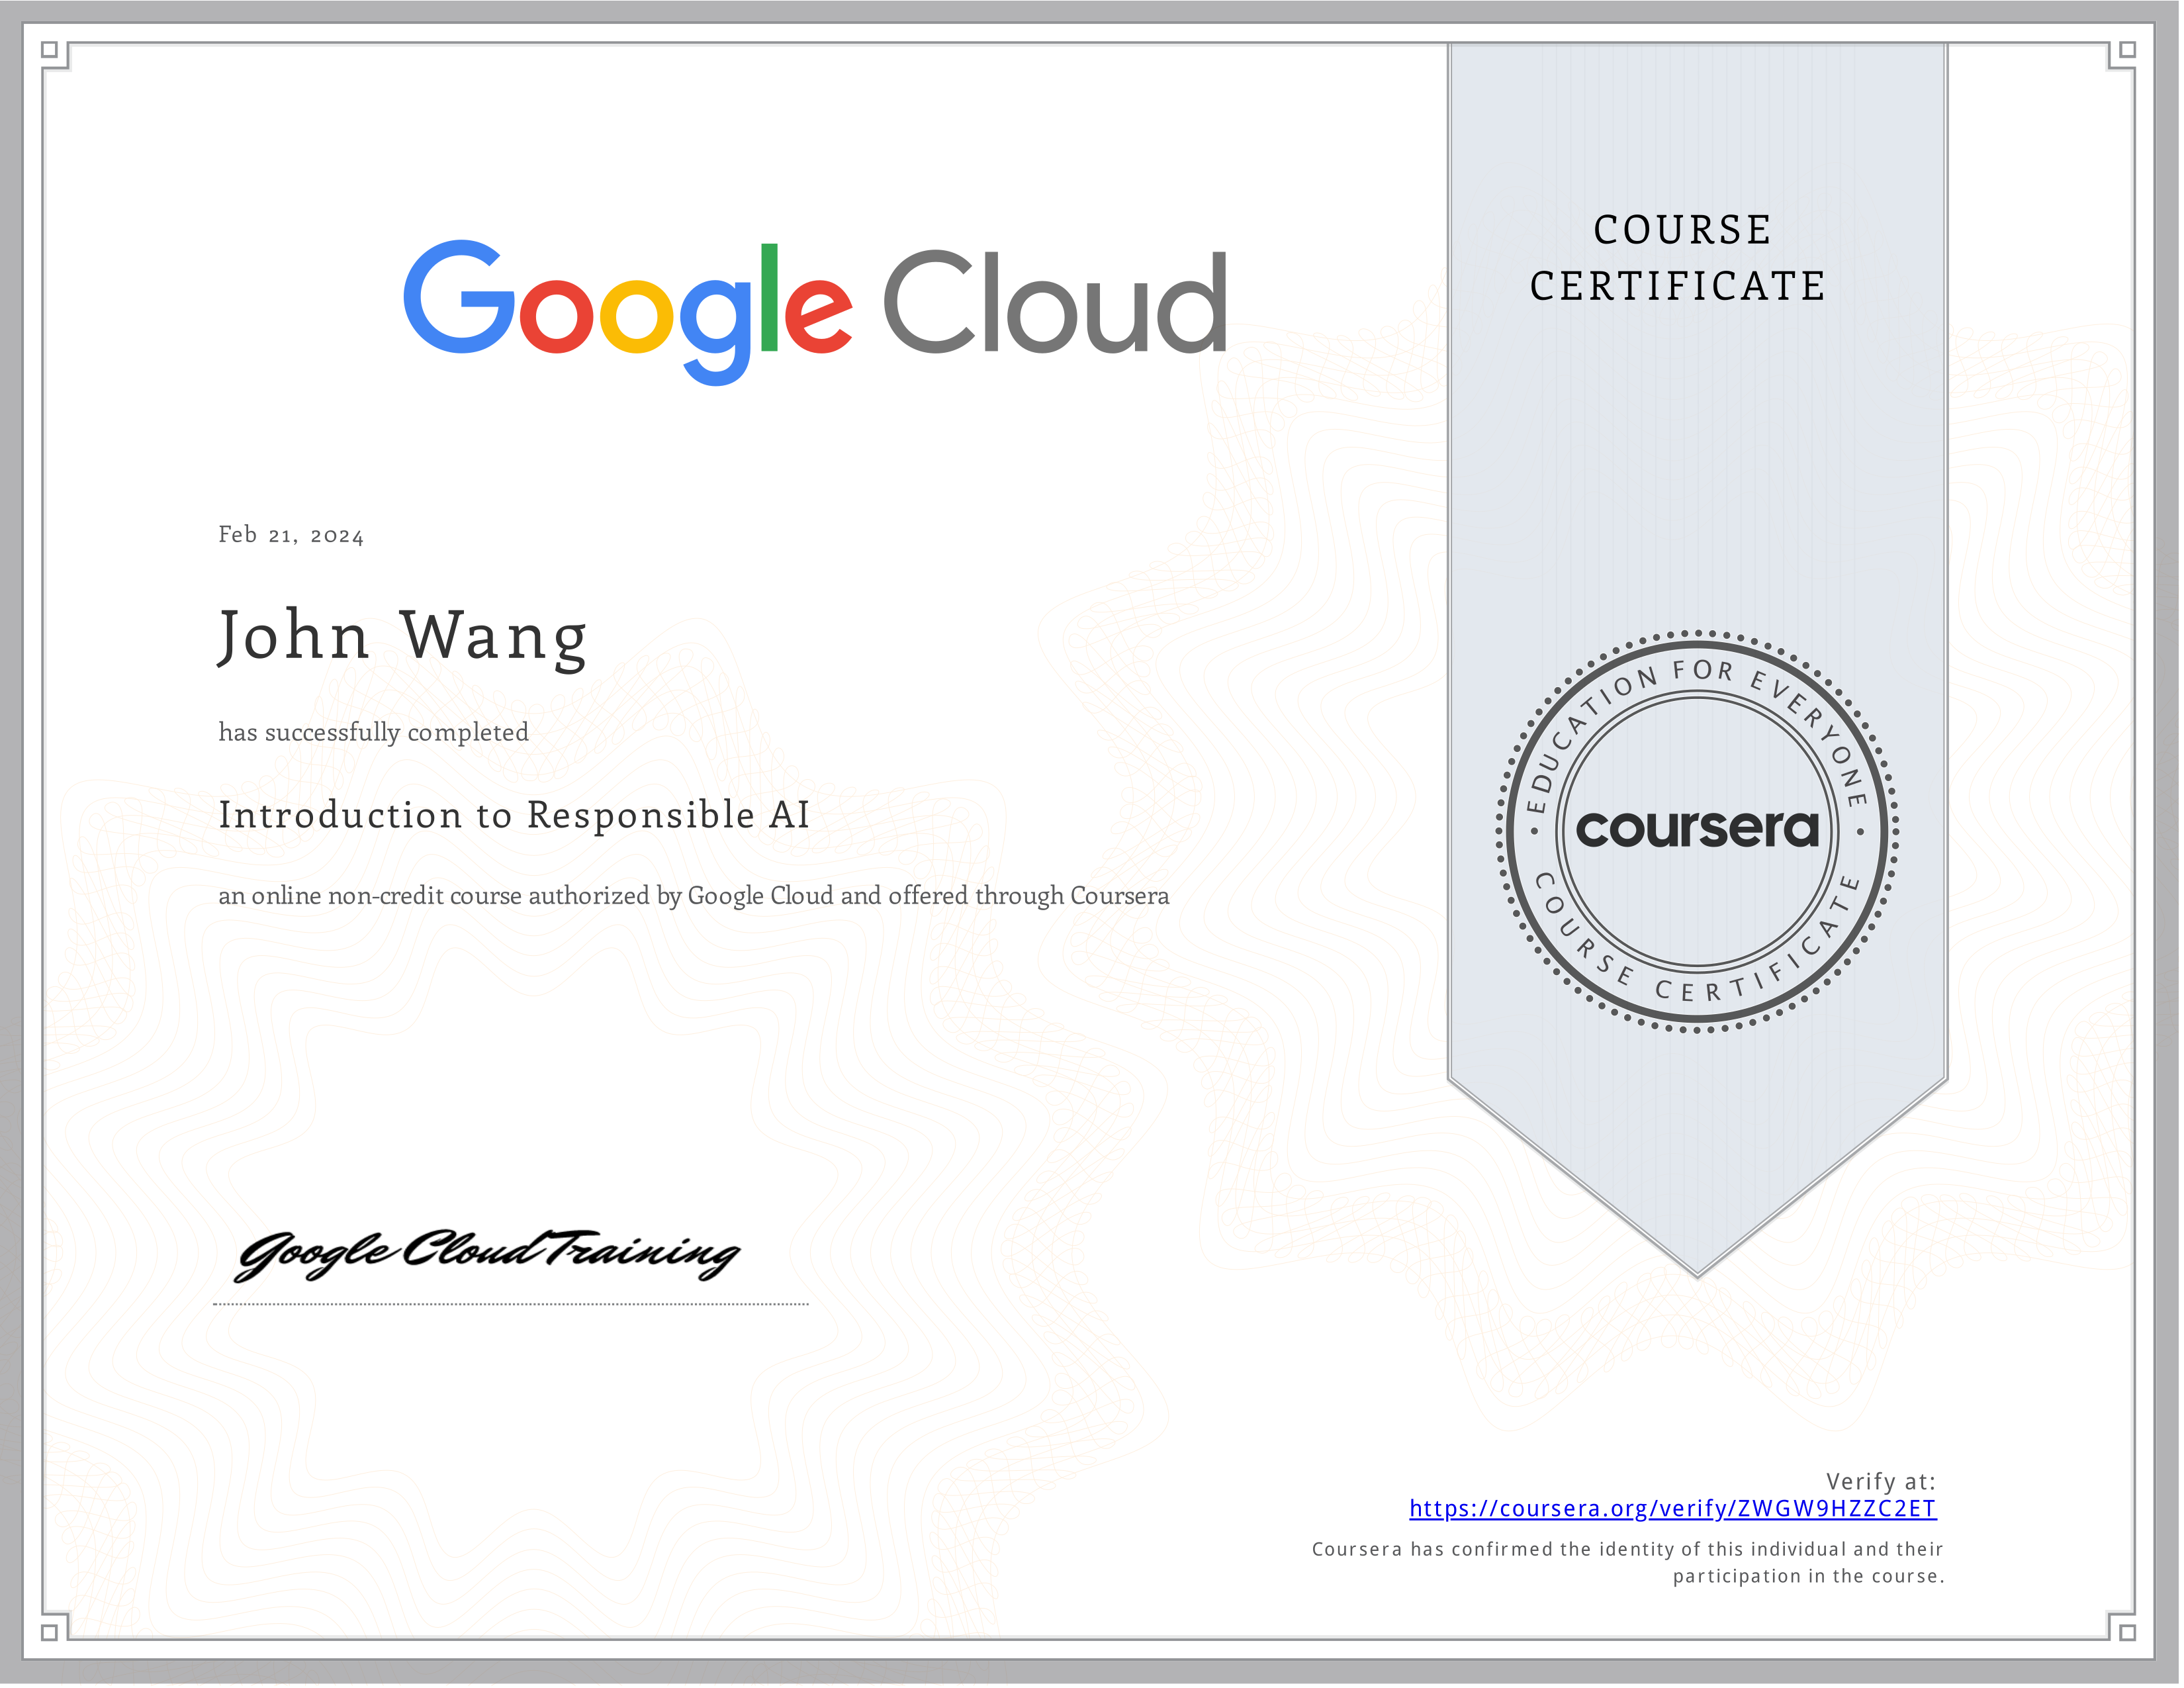 John's Introduction to Responsible AI from Google Cloud